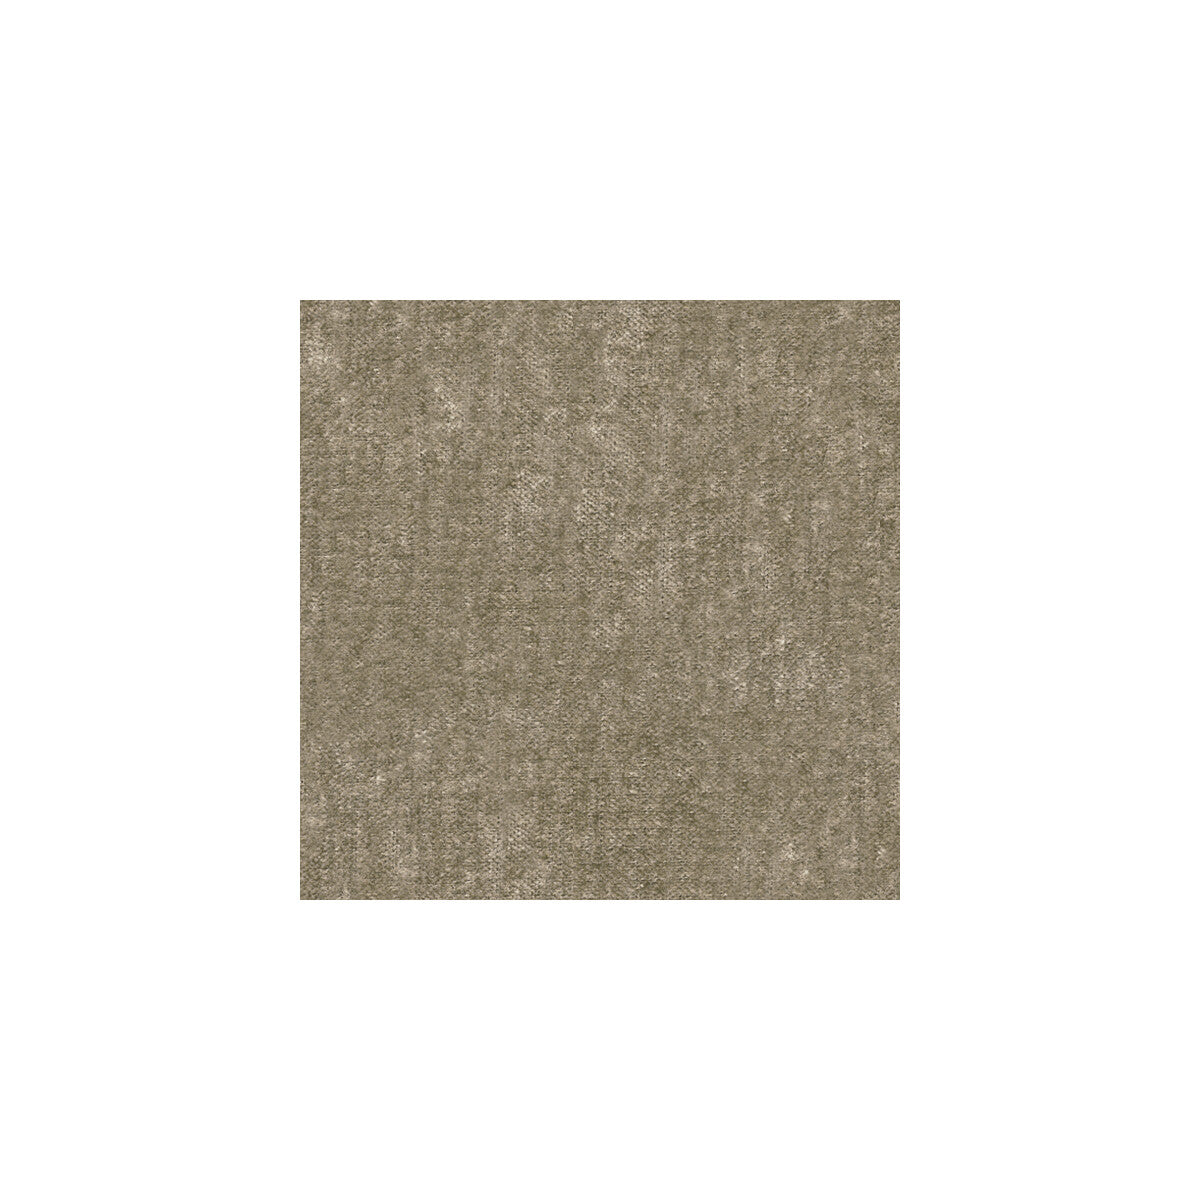 Kravet Contract fabric in 32015-106 color - pattern 32015.106.0 - by Kravet Contract